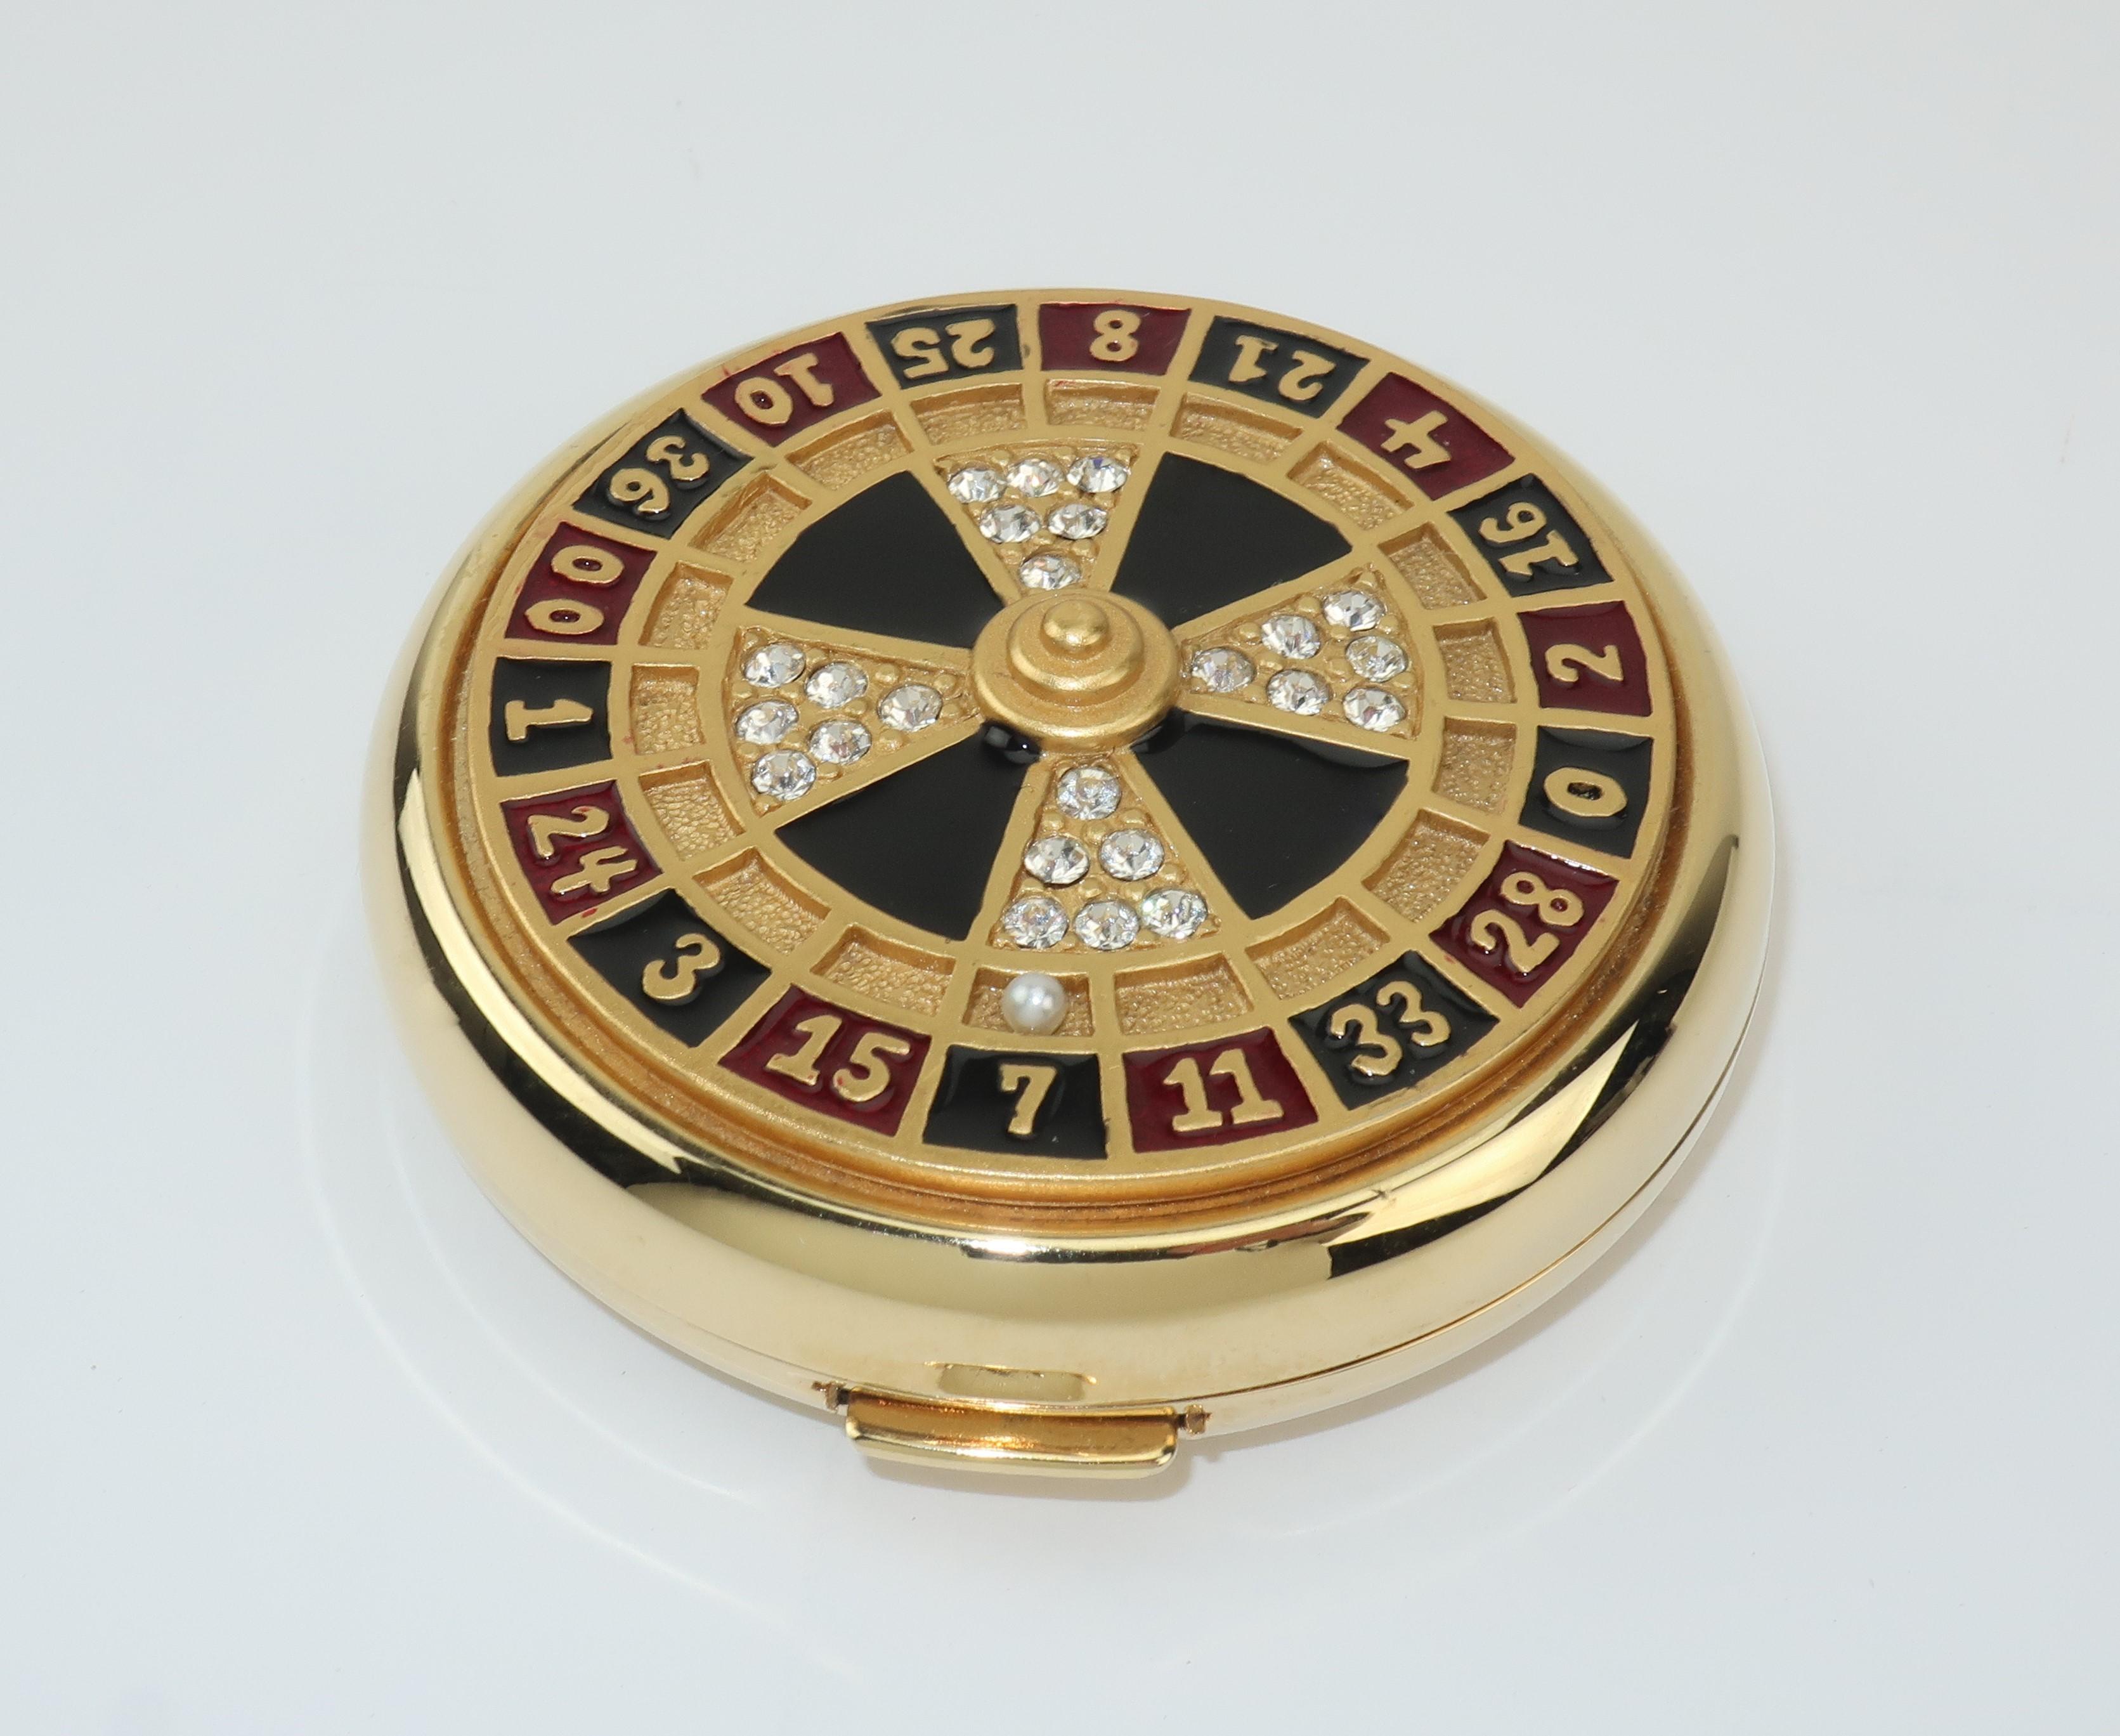 Lady luck! A collectible powder compact from Estee Lauder in the shape of a roulette wheel with black and dark red enameling accented by crystal rhinestones and a single pearl all set in a jewelry quality gold tone metal. The push button closure